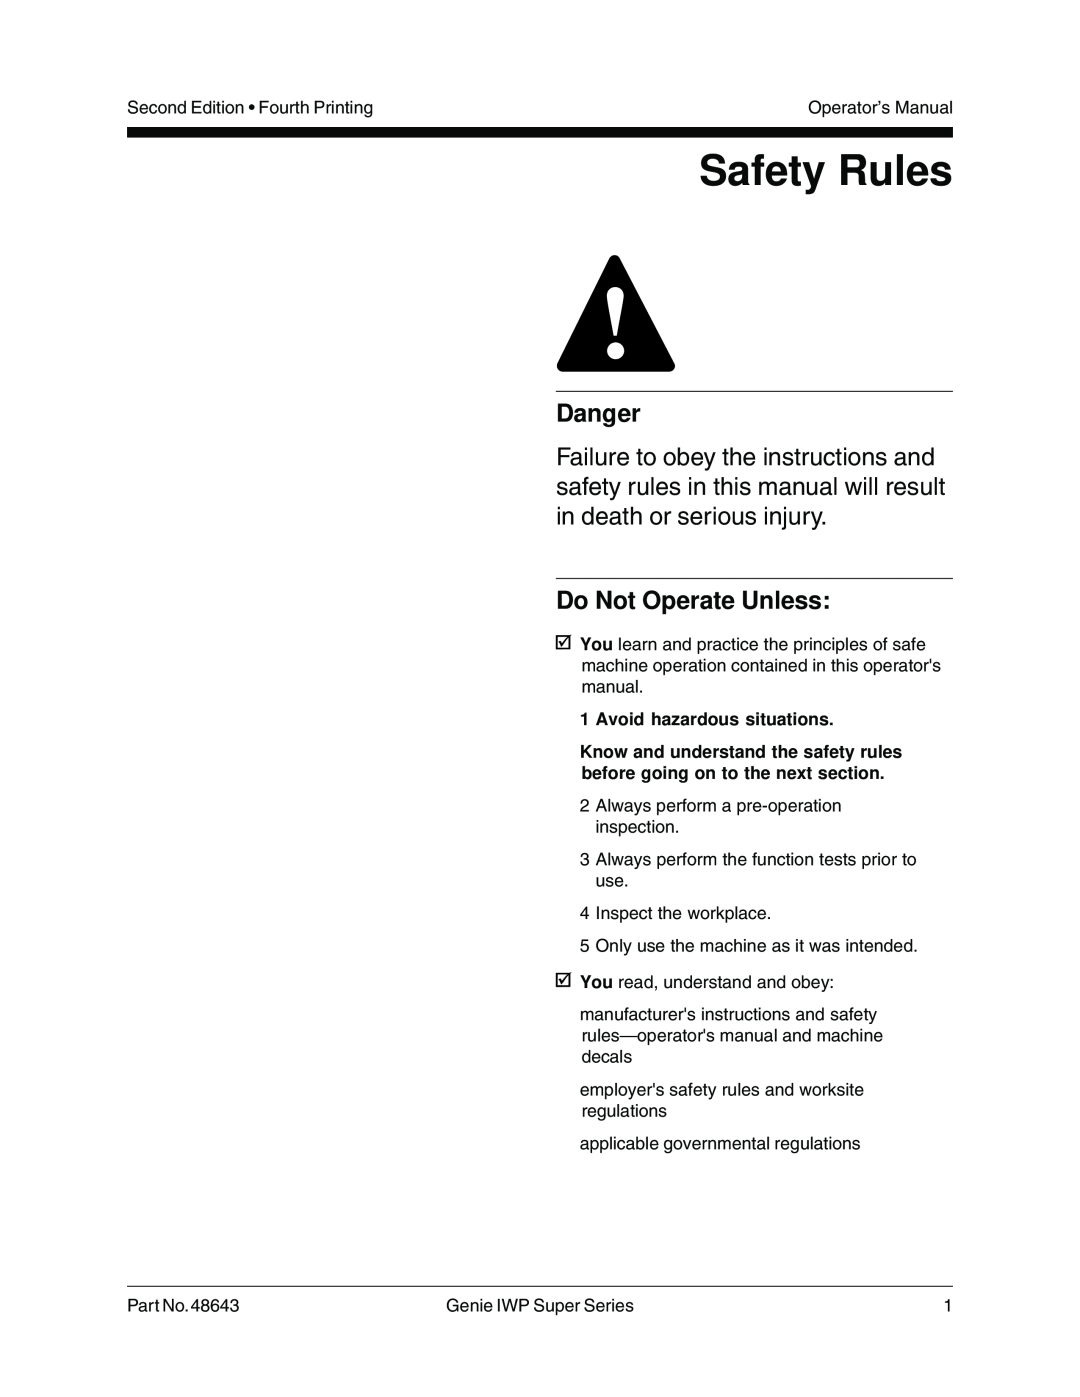 Genie 48643 manual Safety Rules, Danger, Do Not Operate Unless, Avoid hazardous situations 